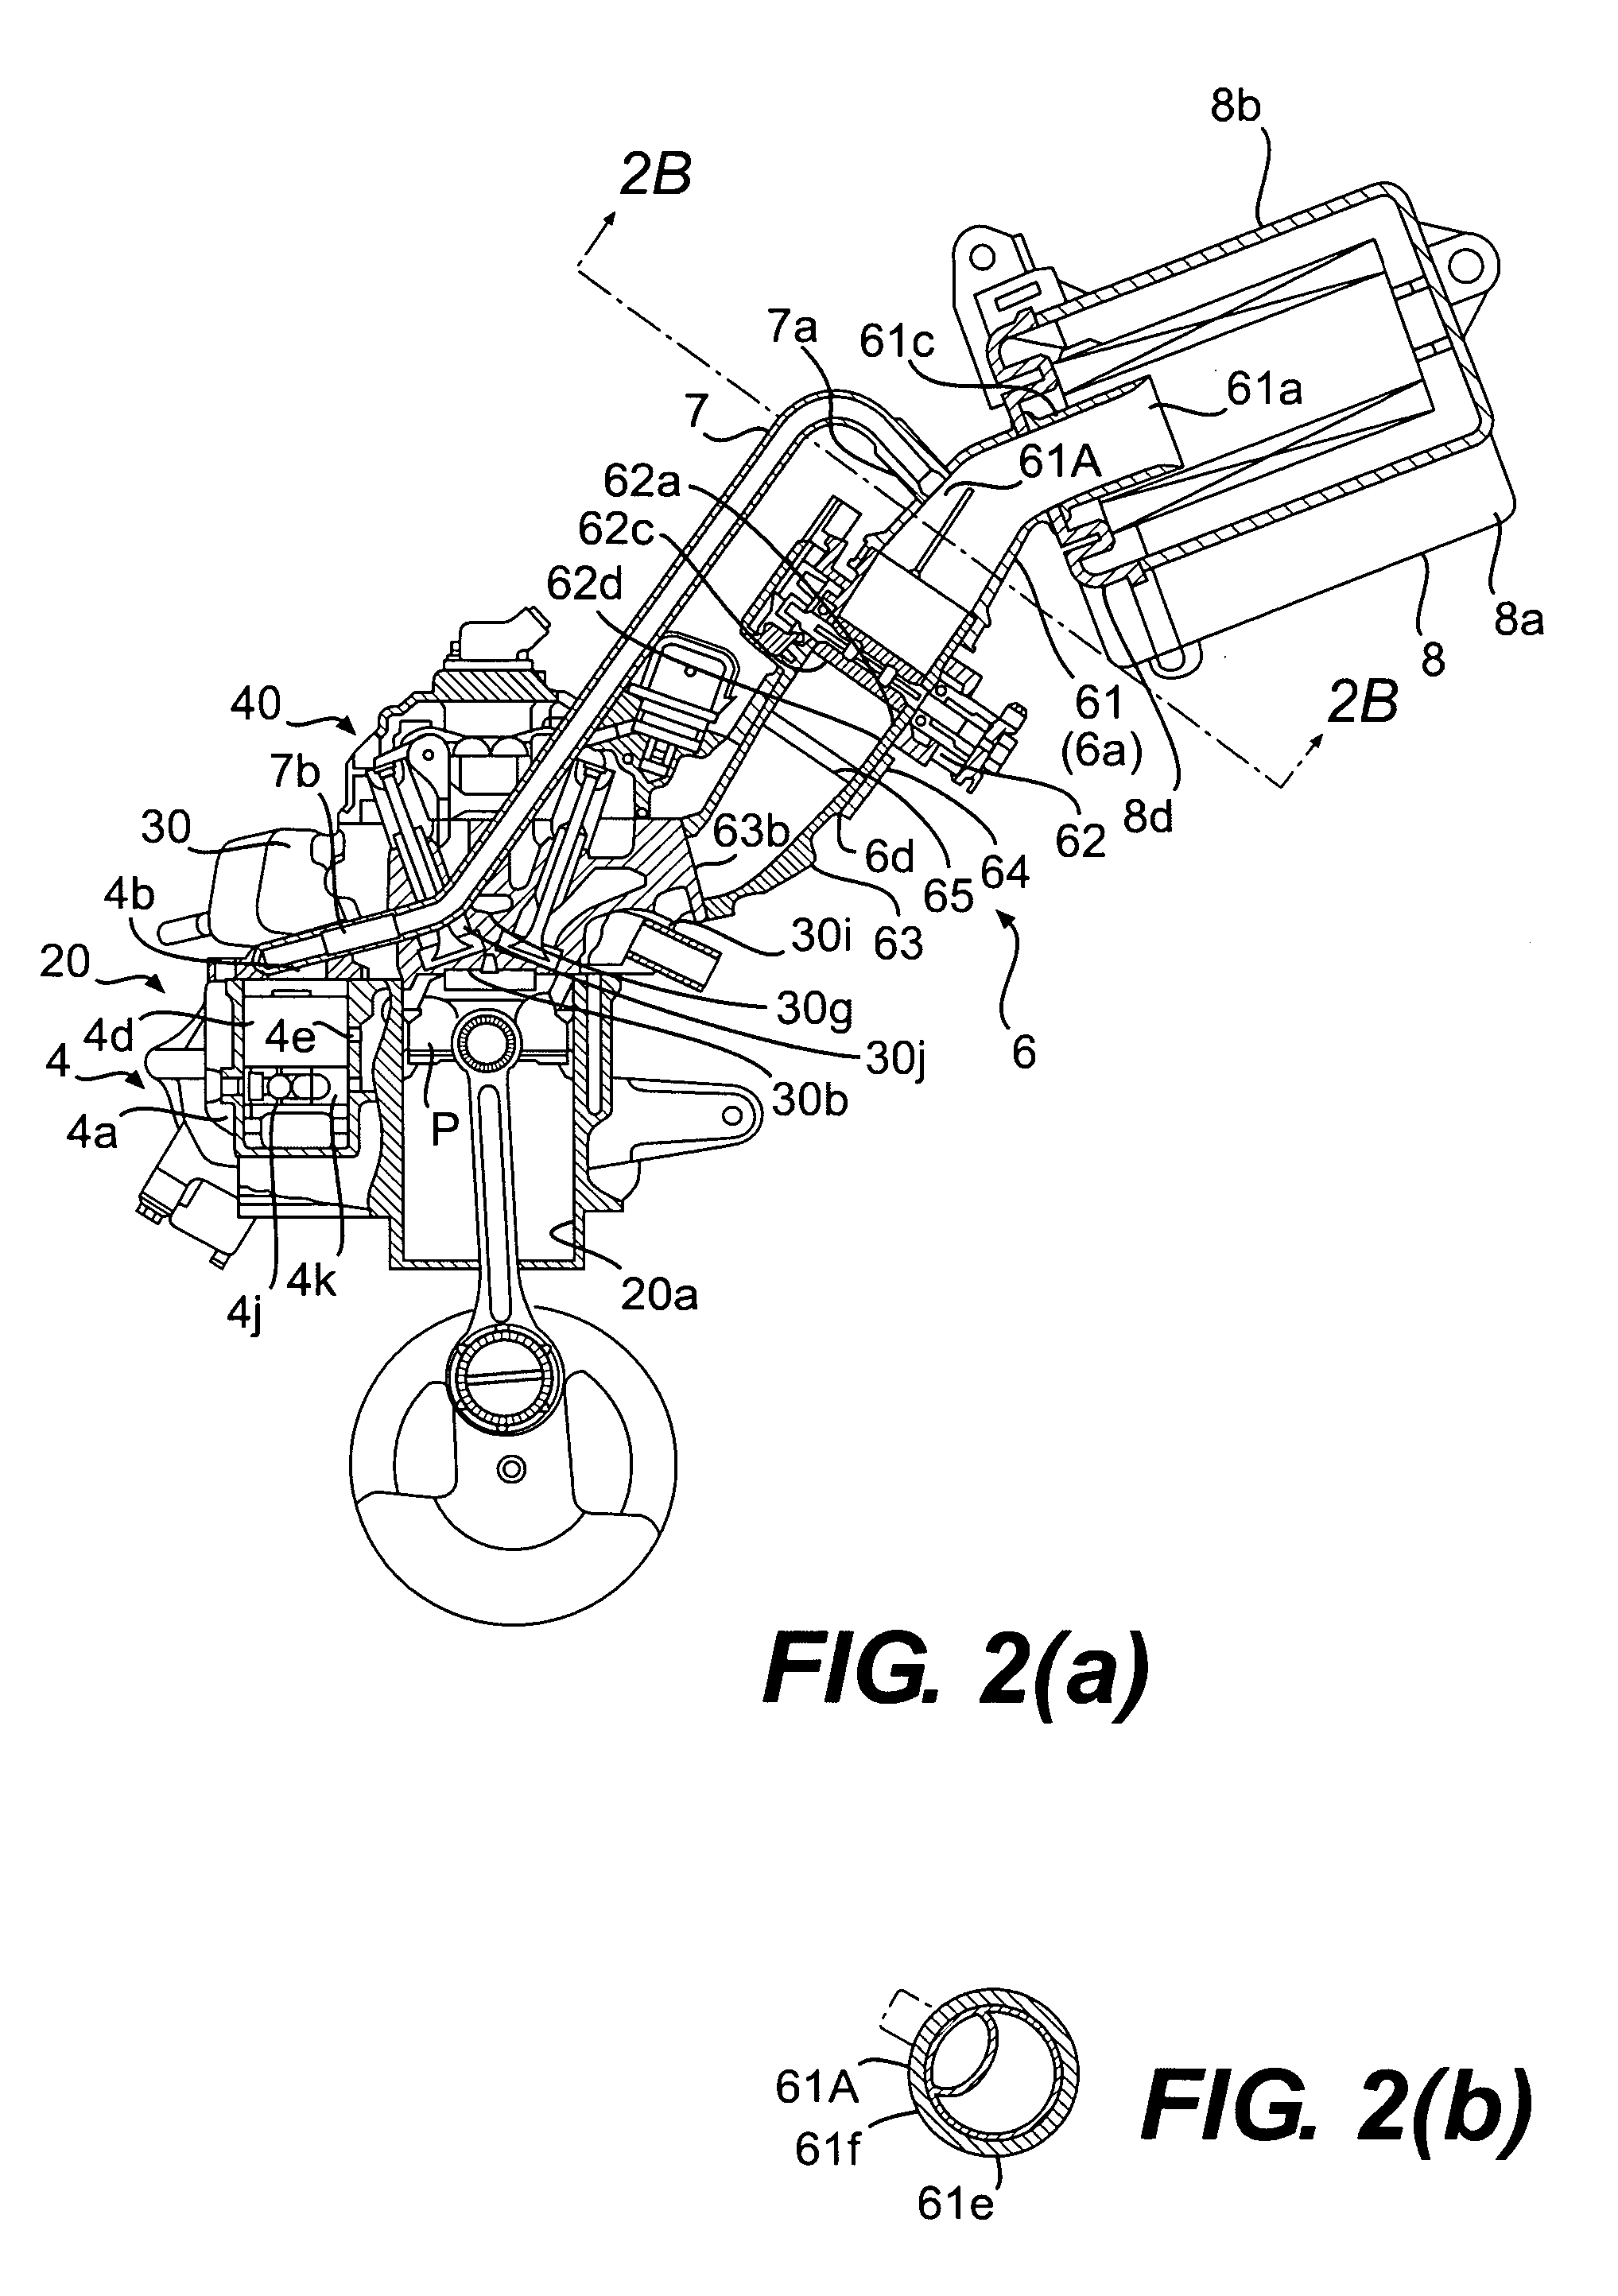 Internal combustion engine with air-fuel mixture injection